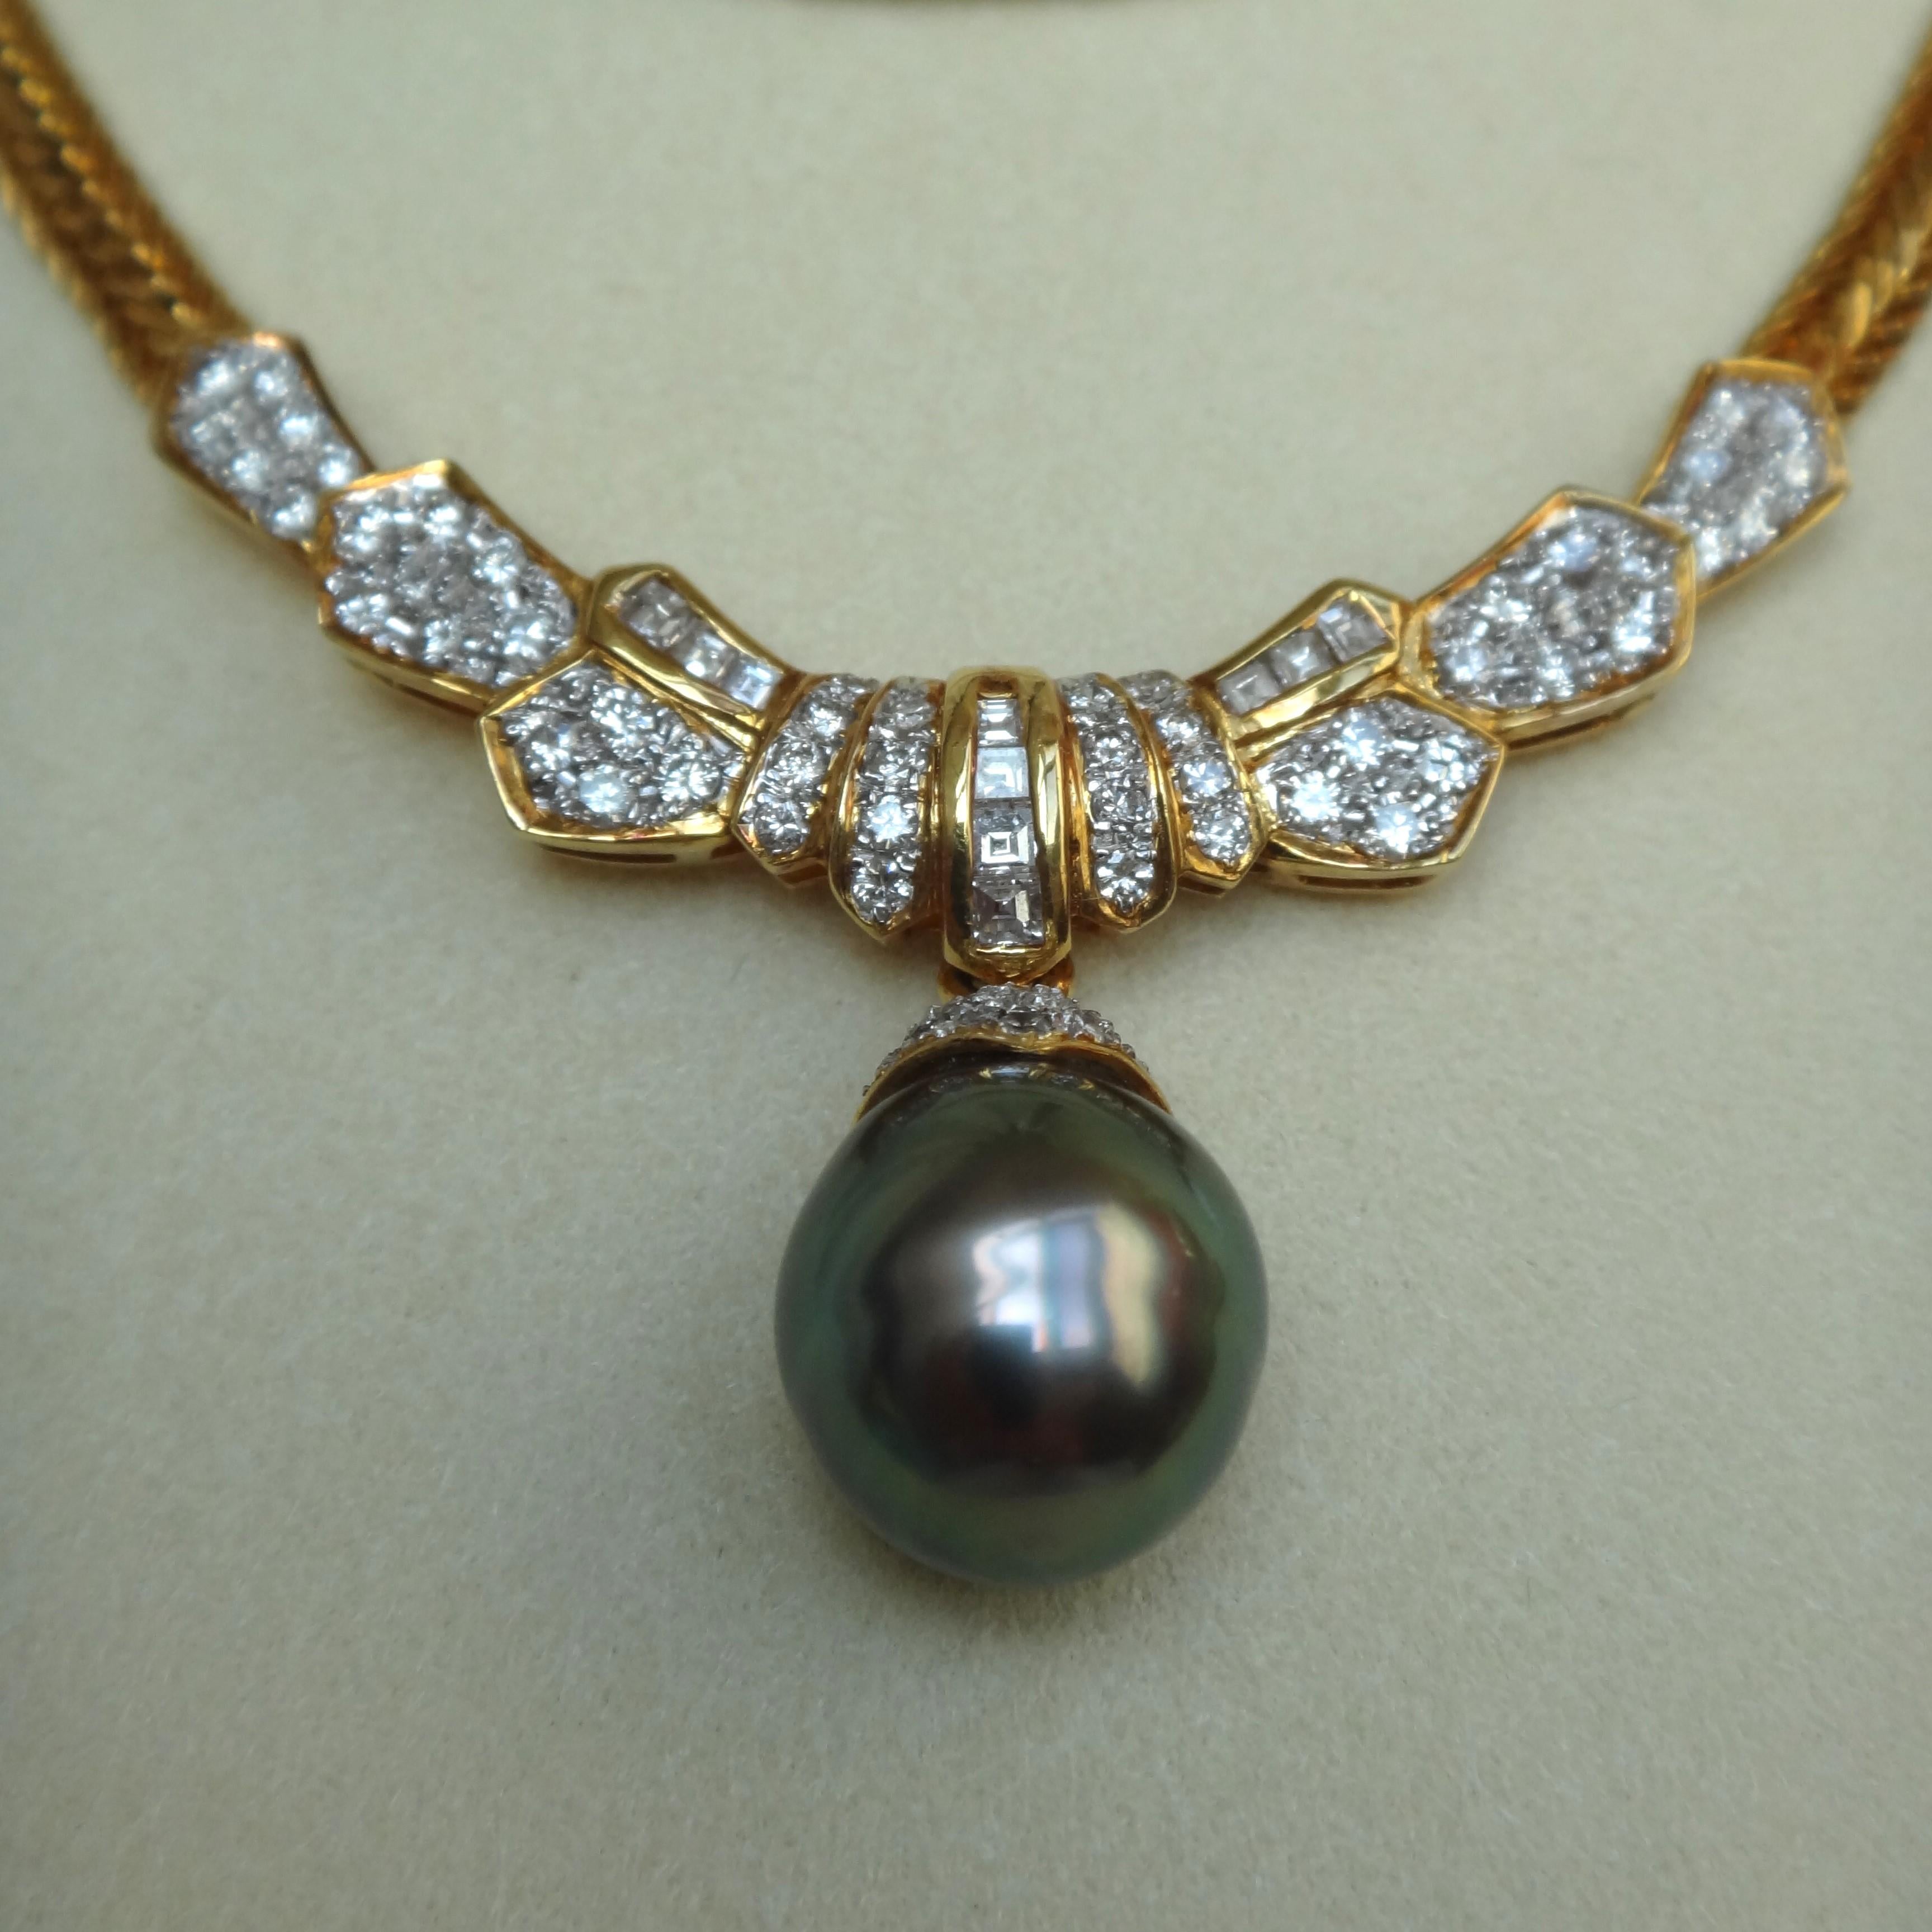 18K Gold diamond necklace with a vivid green black Tahitian Pearl, 1.36 high quality diamond, grace classic design, delicate details, ItalyMade.
On the back of the gold frame are Steel seals: ITALY, 750K18, D1.36.
